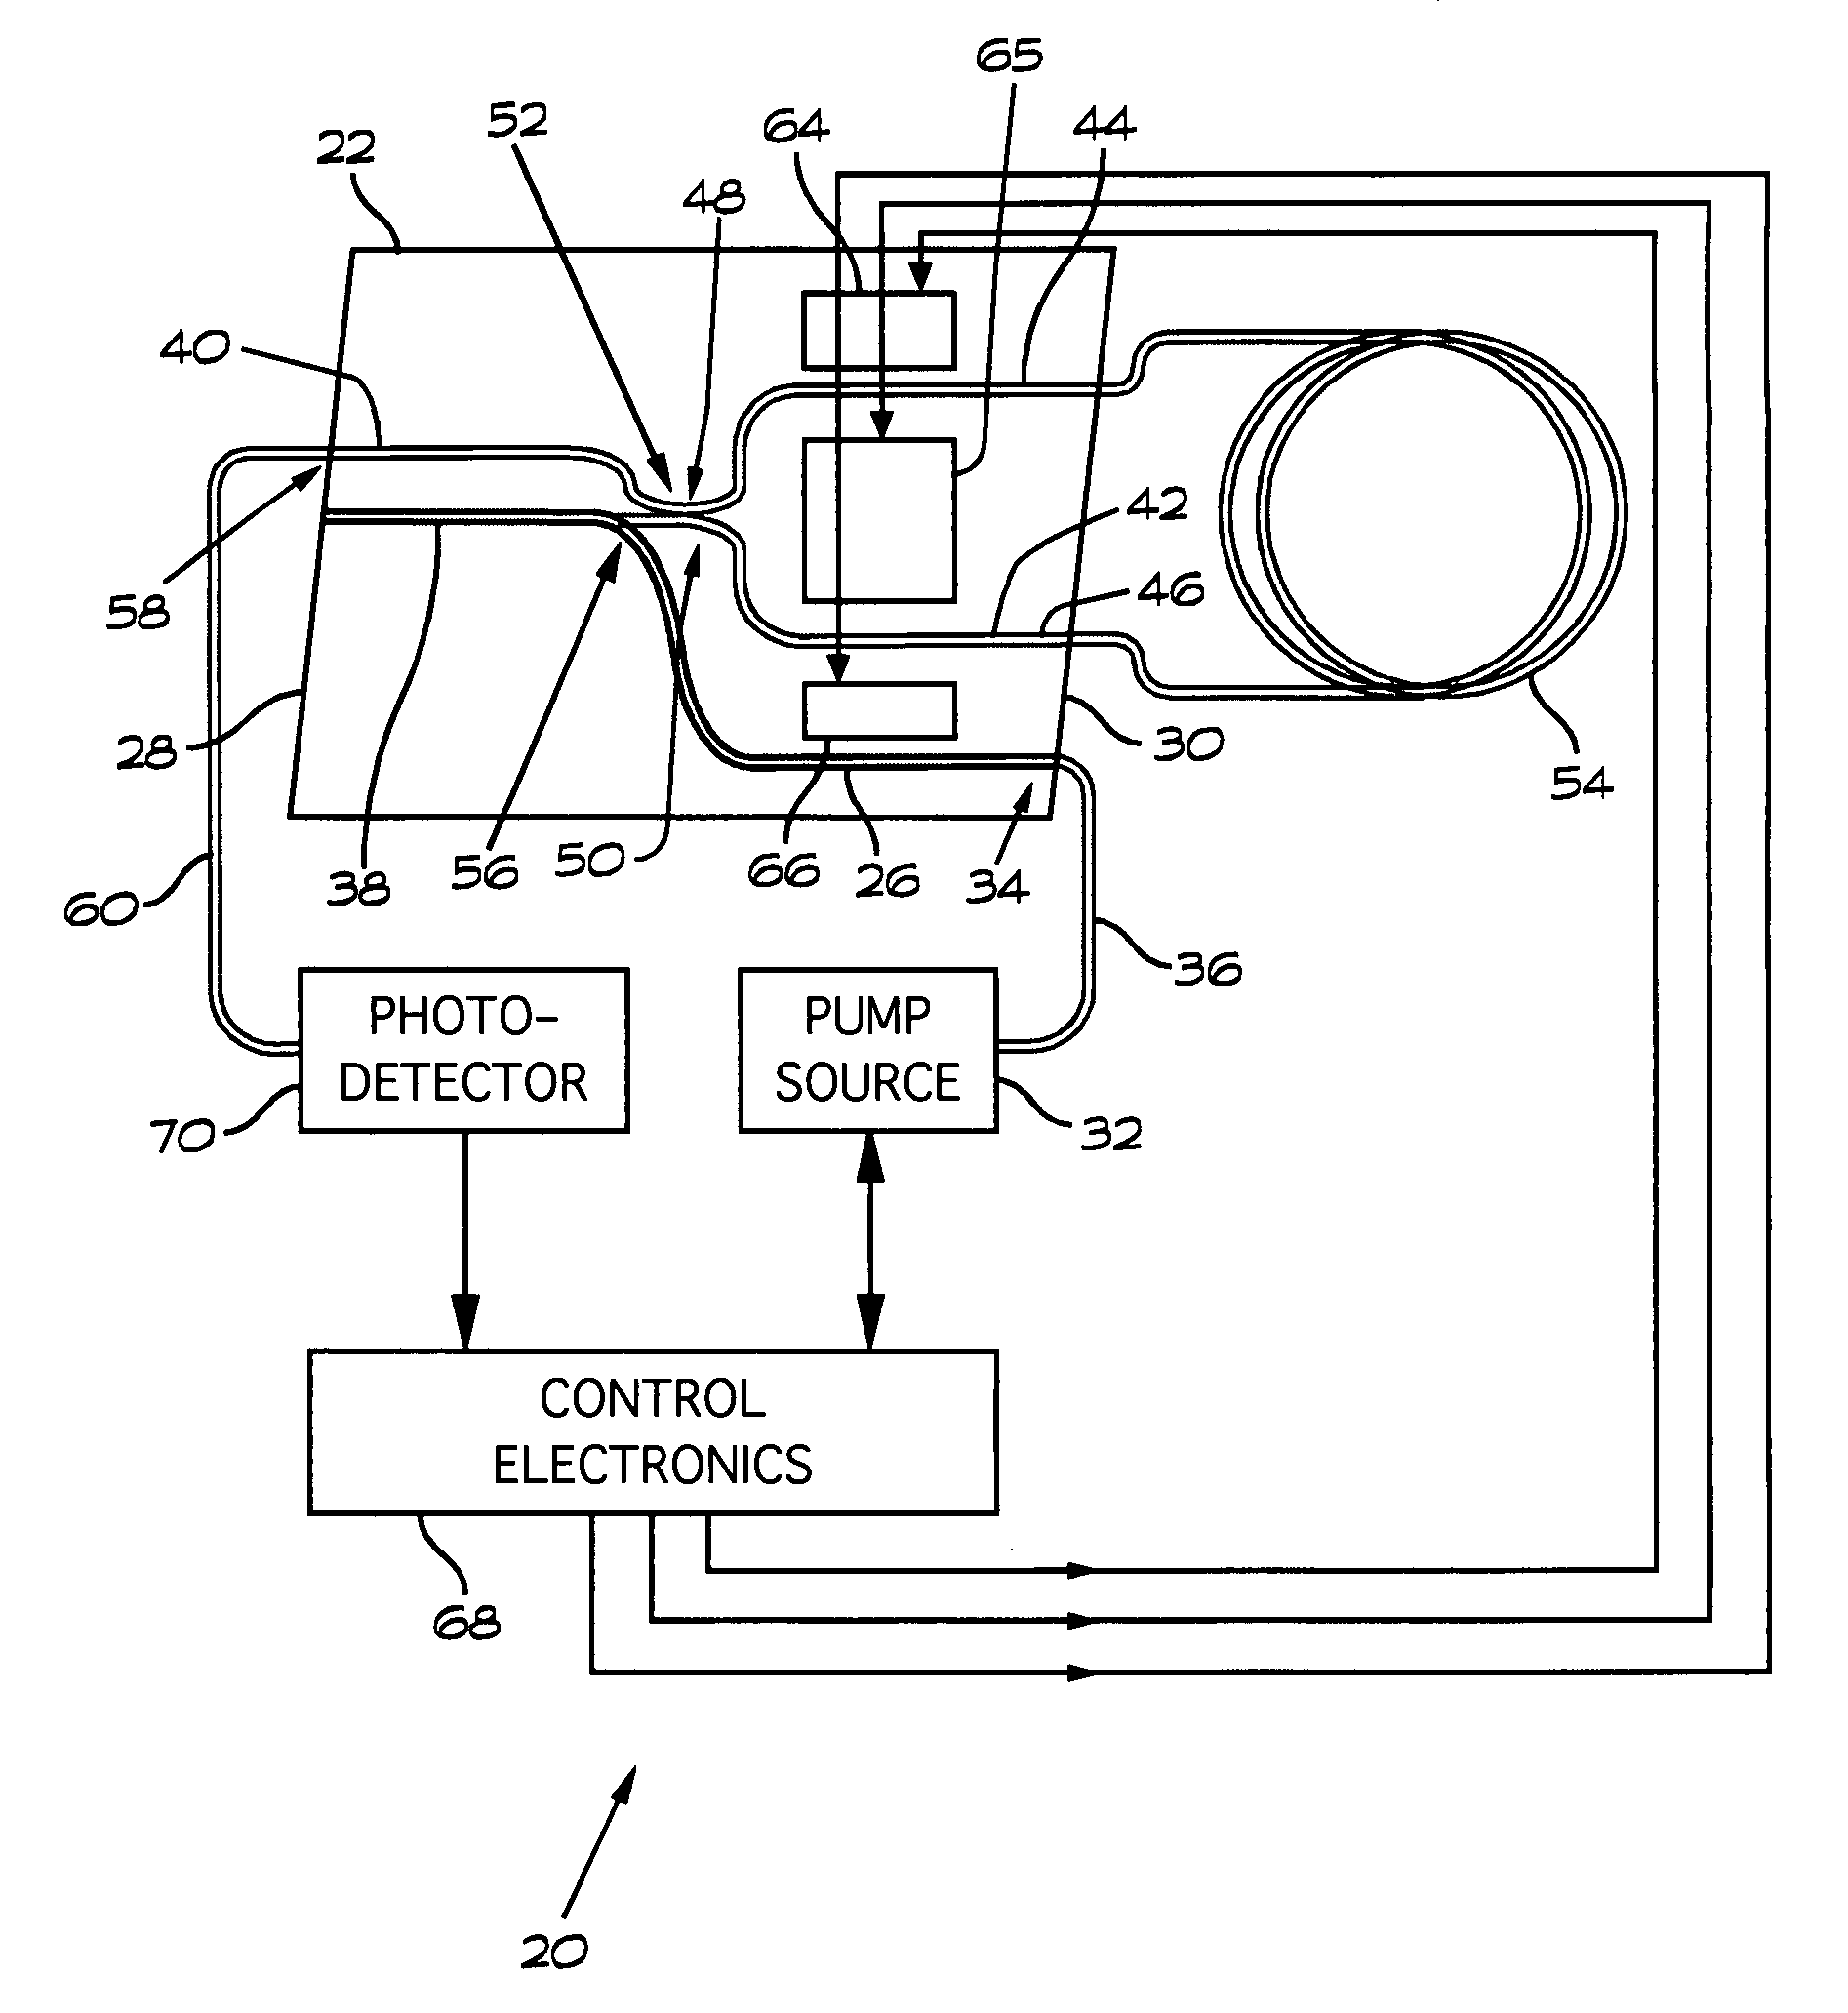 Fiber optic gyroscope with integrated light source